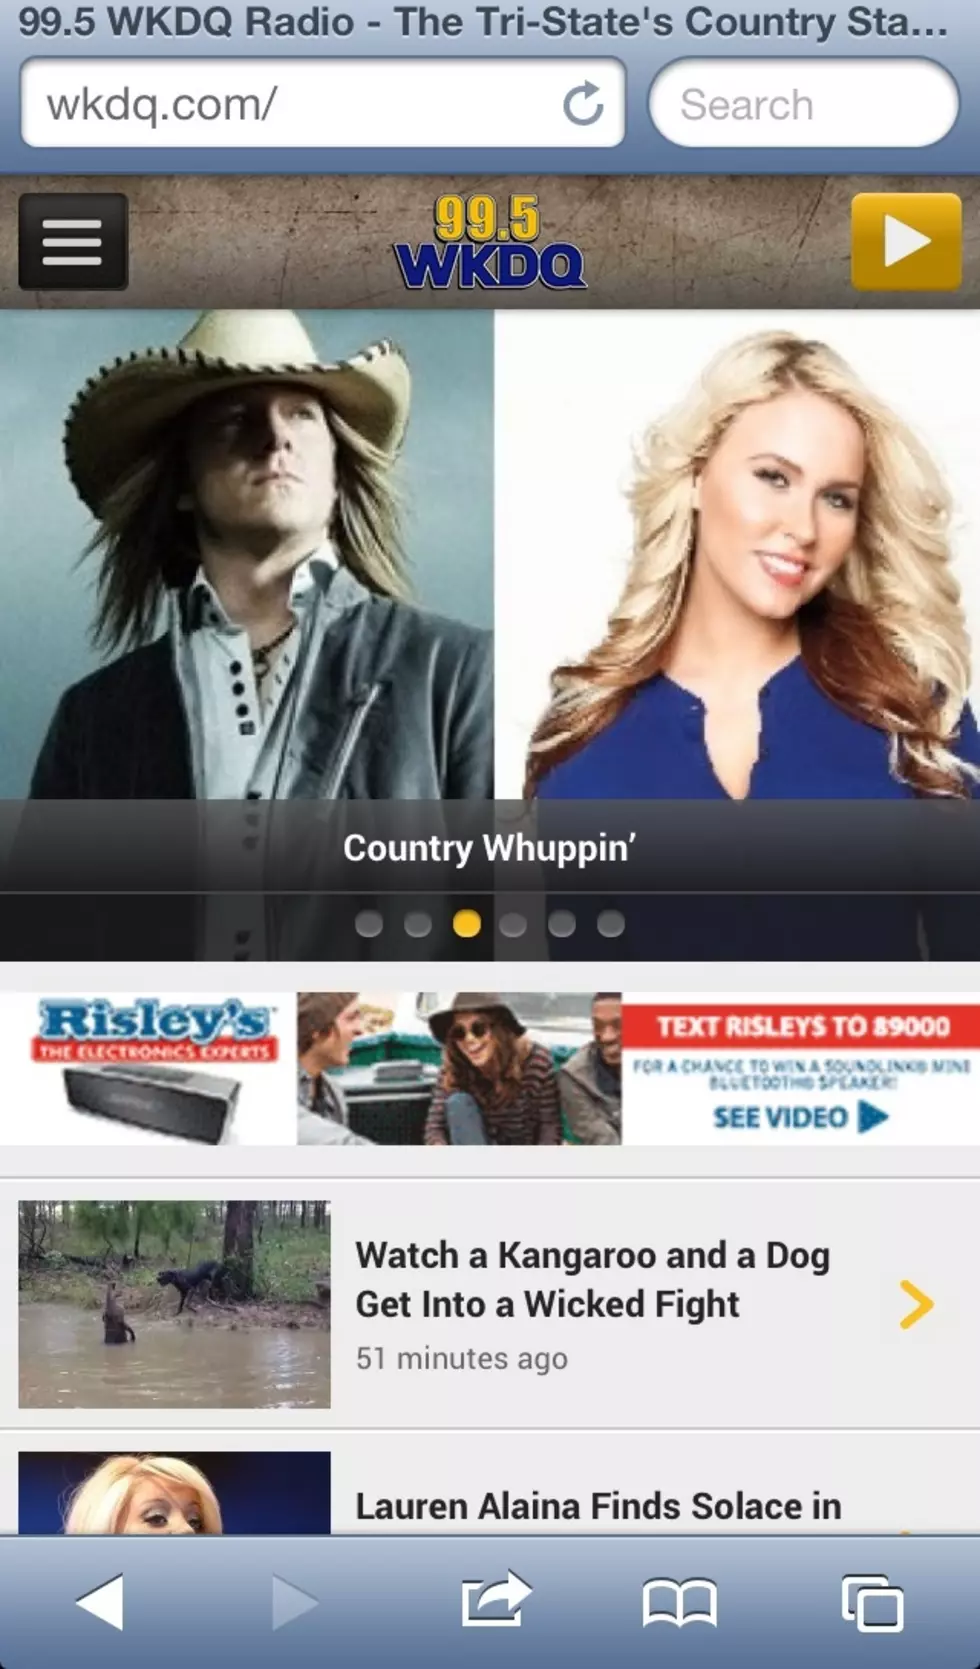 5 Reasons to Check Out WKDQ’s New Mobile Site Right NOW!